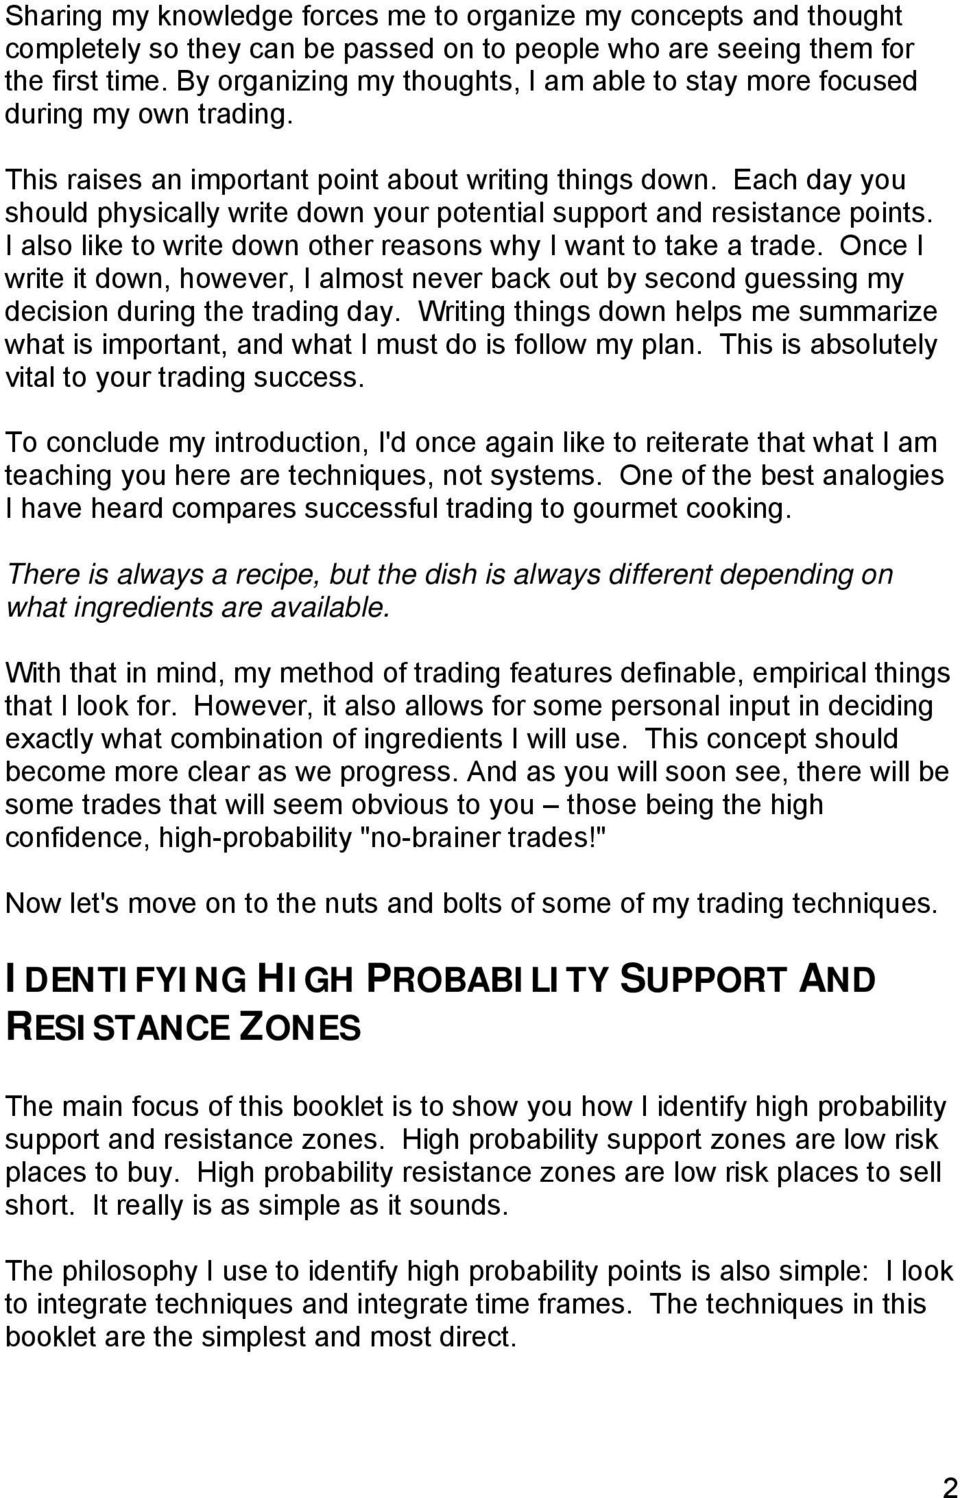 Each day you should physically write down your potential support and resistance points. I also like to write down other reasons why I want to take a trade.